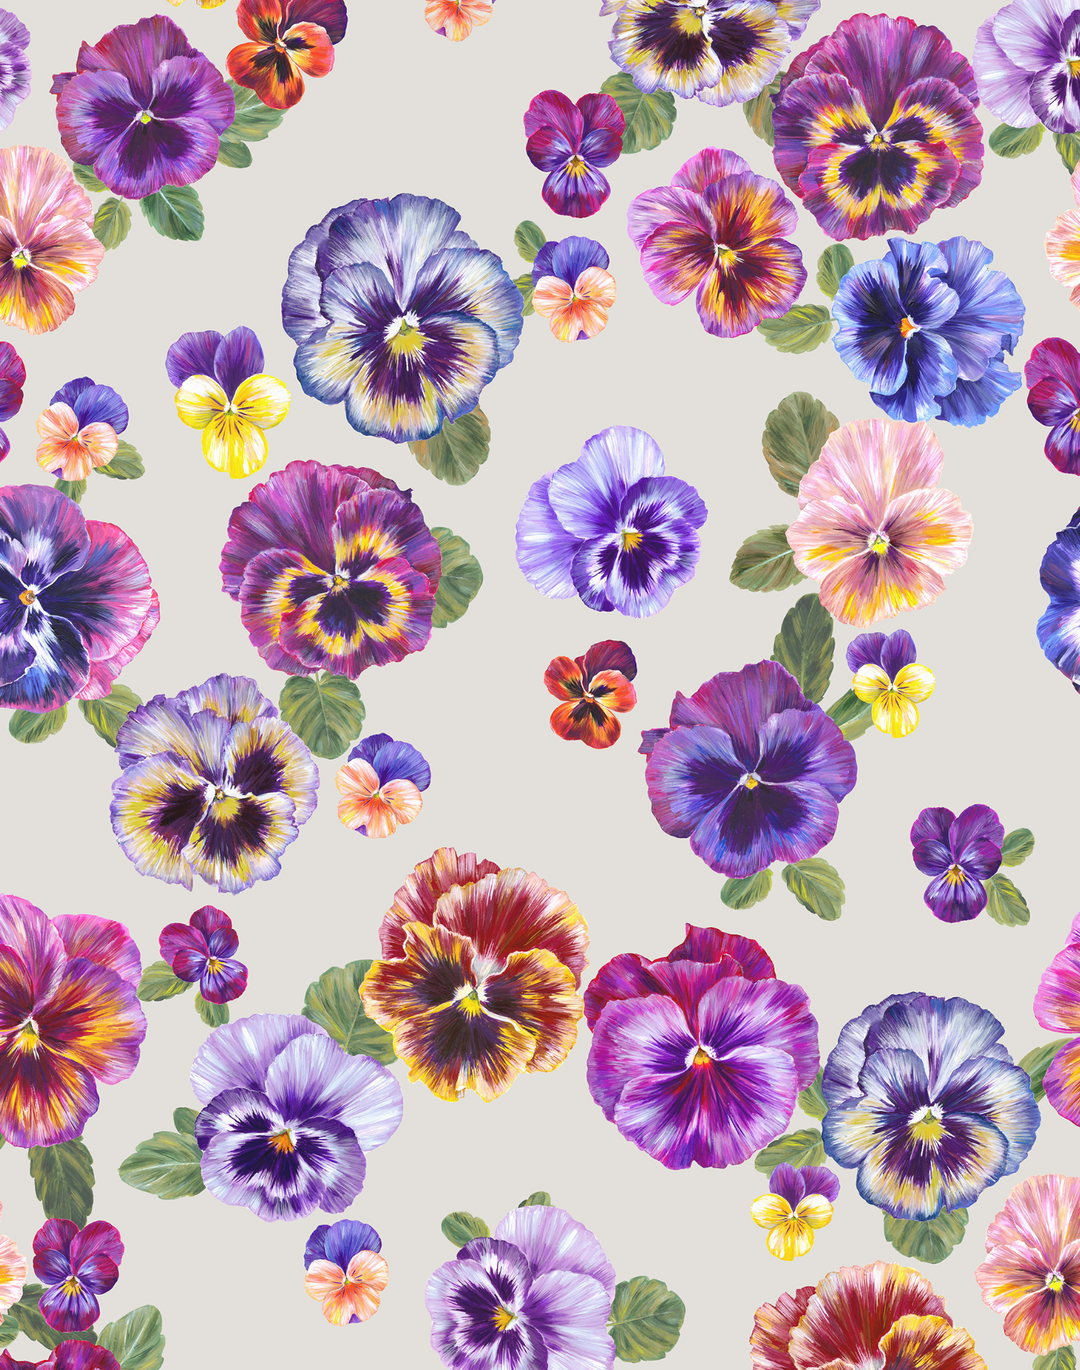 Plethora of Pansies, Stone - Linen Oyster